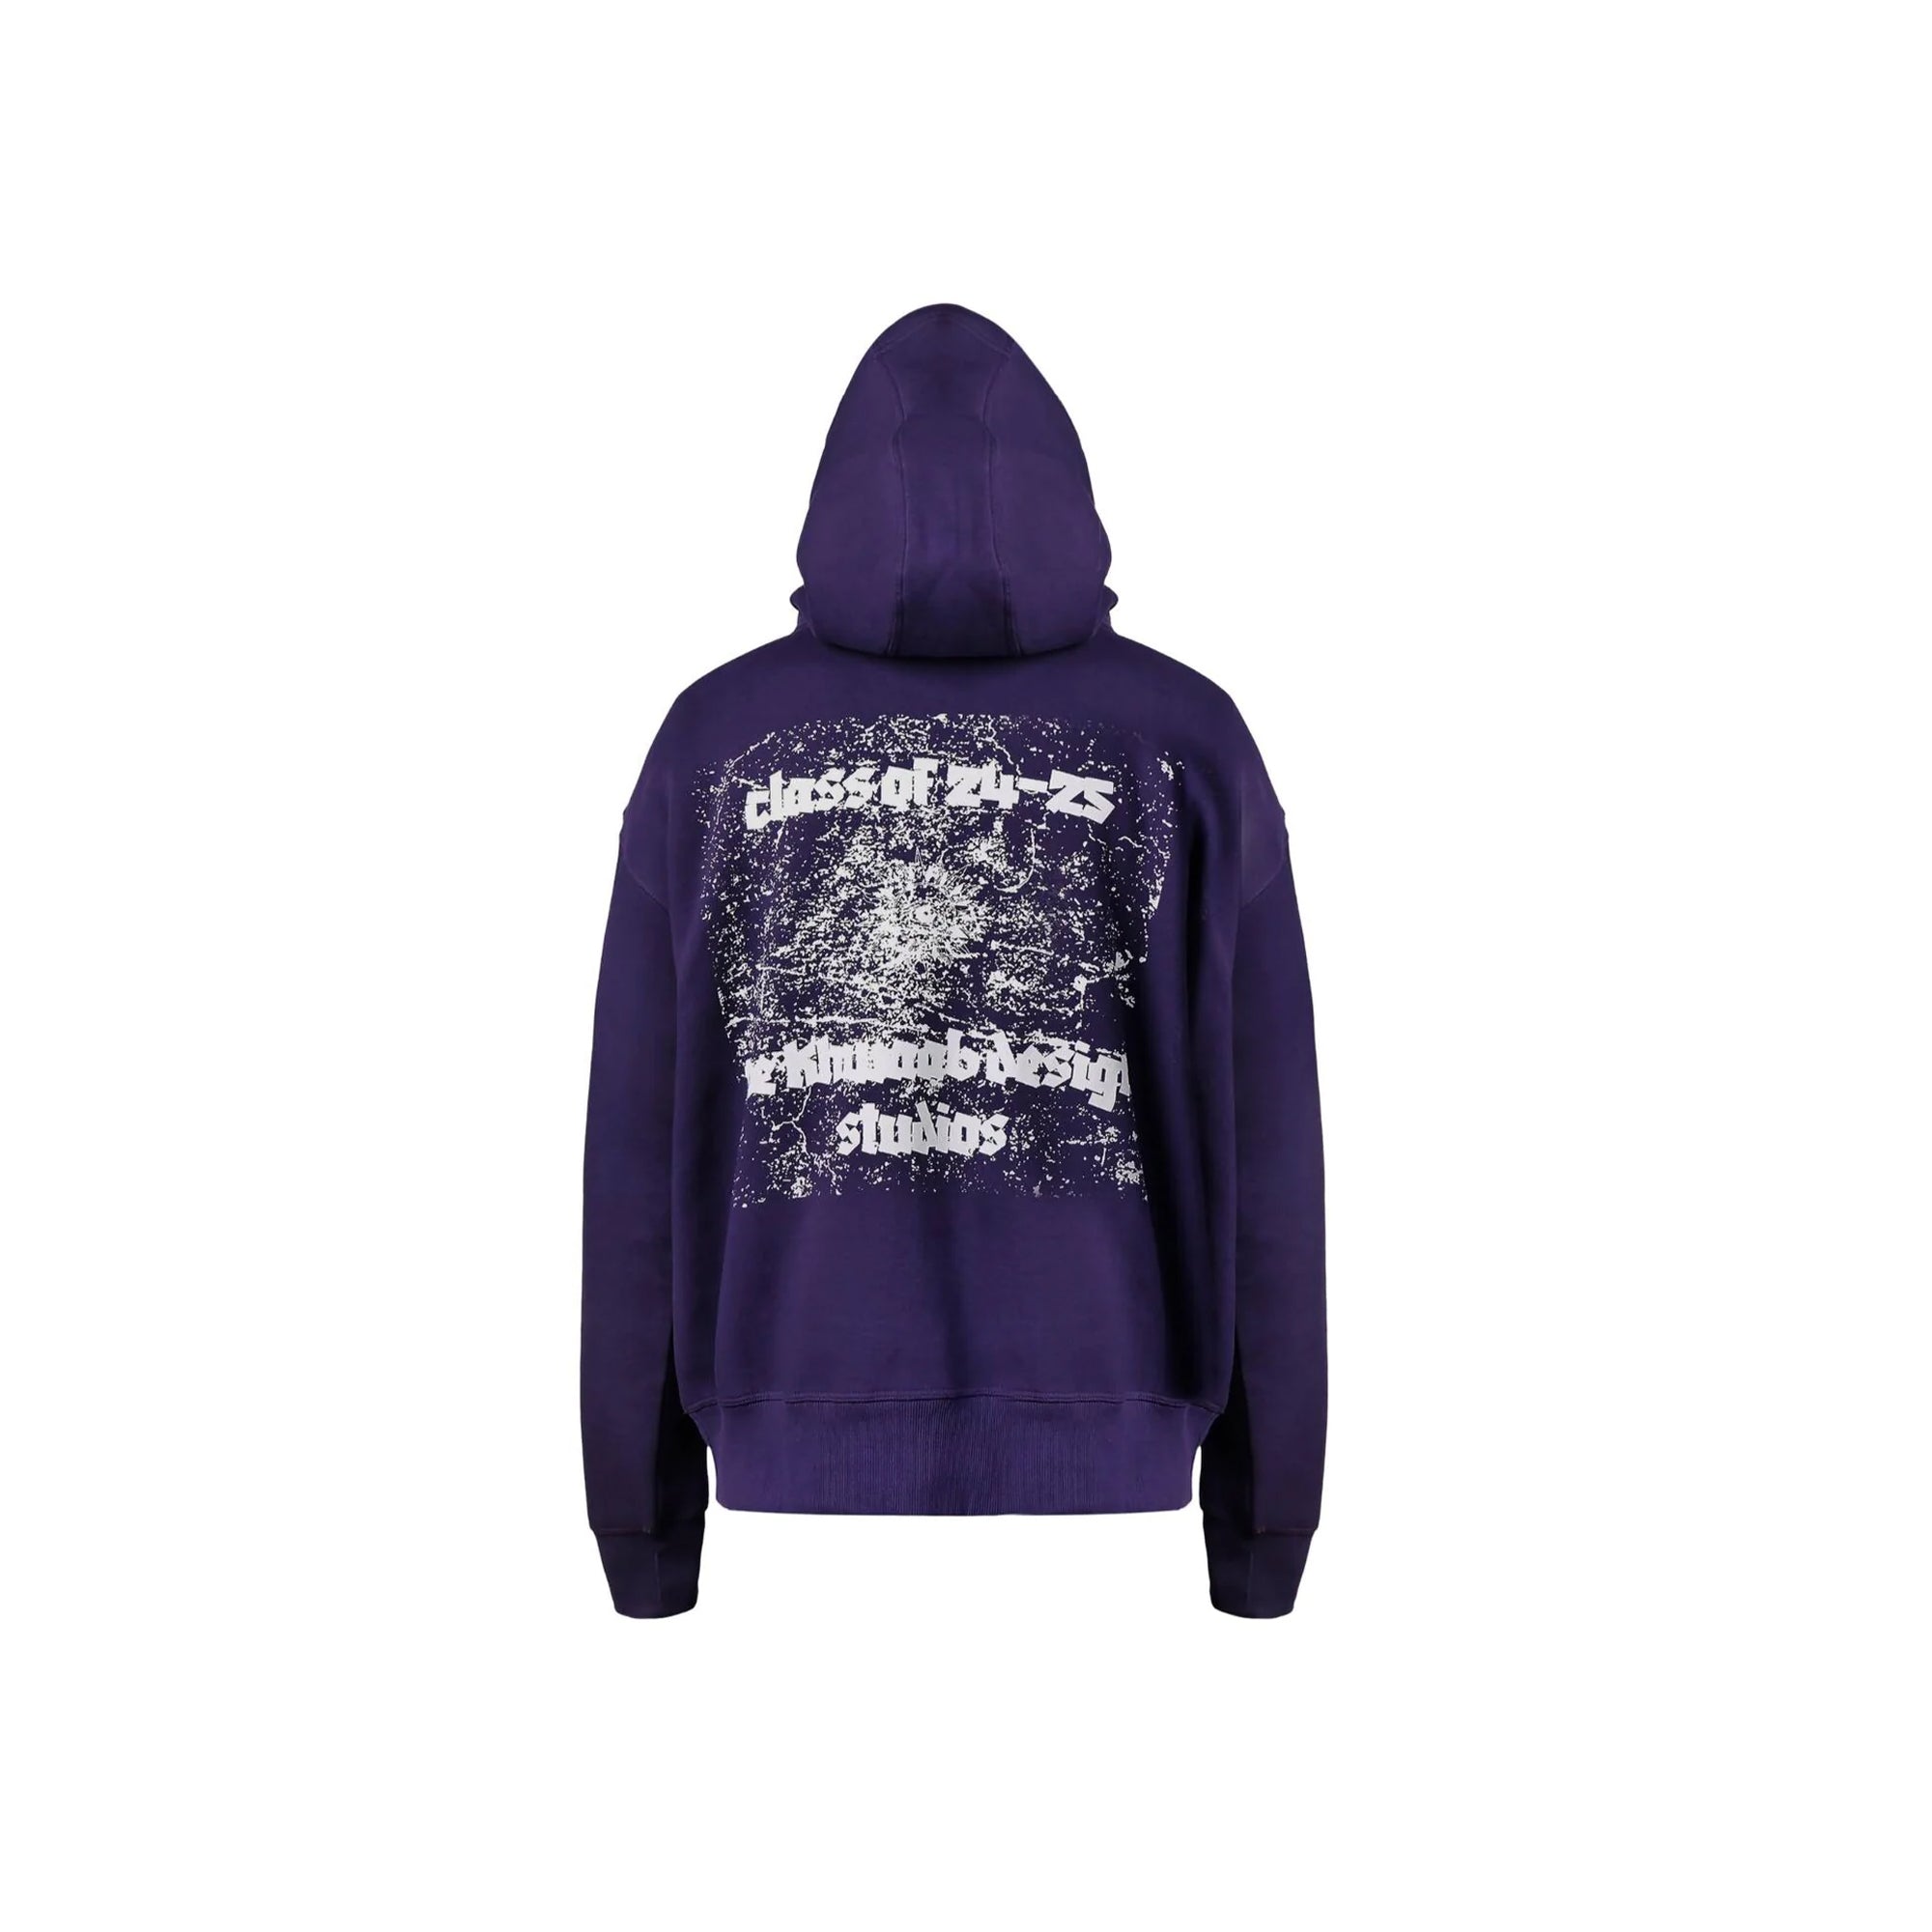 Fragile - Handle with care Hoodie